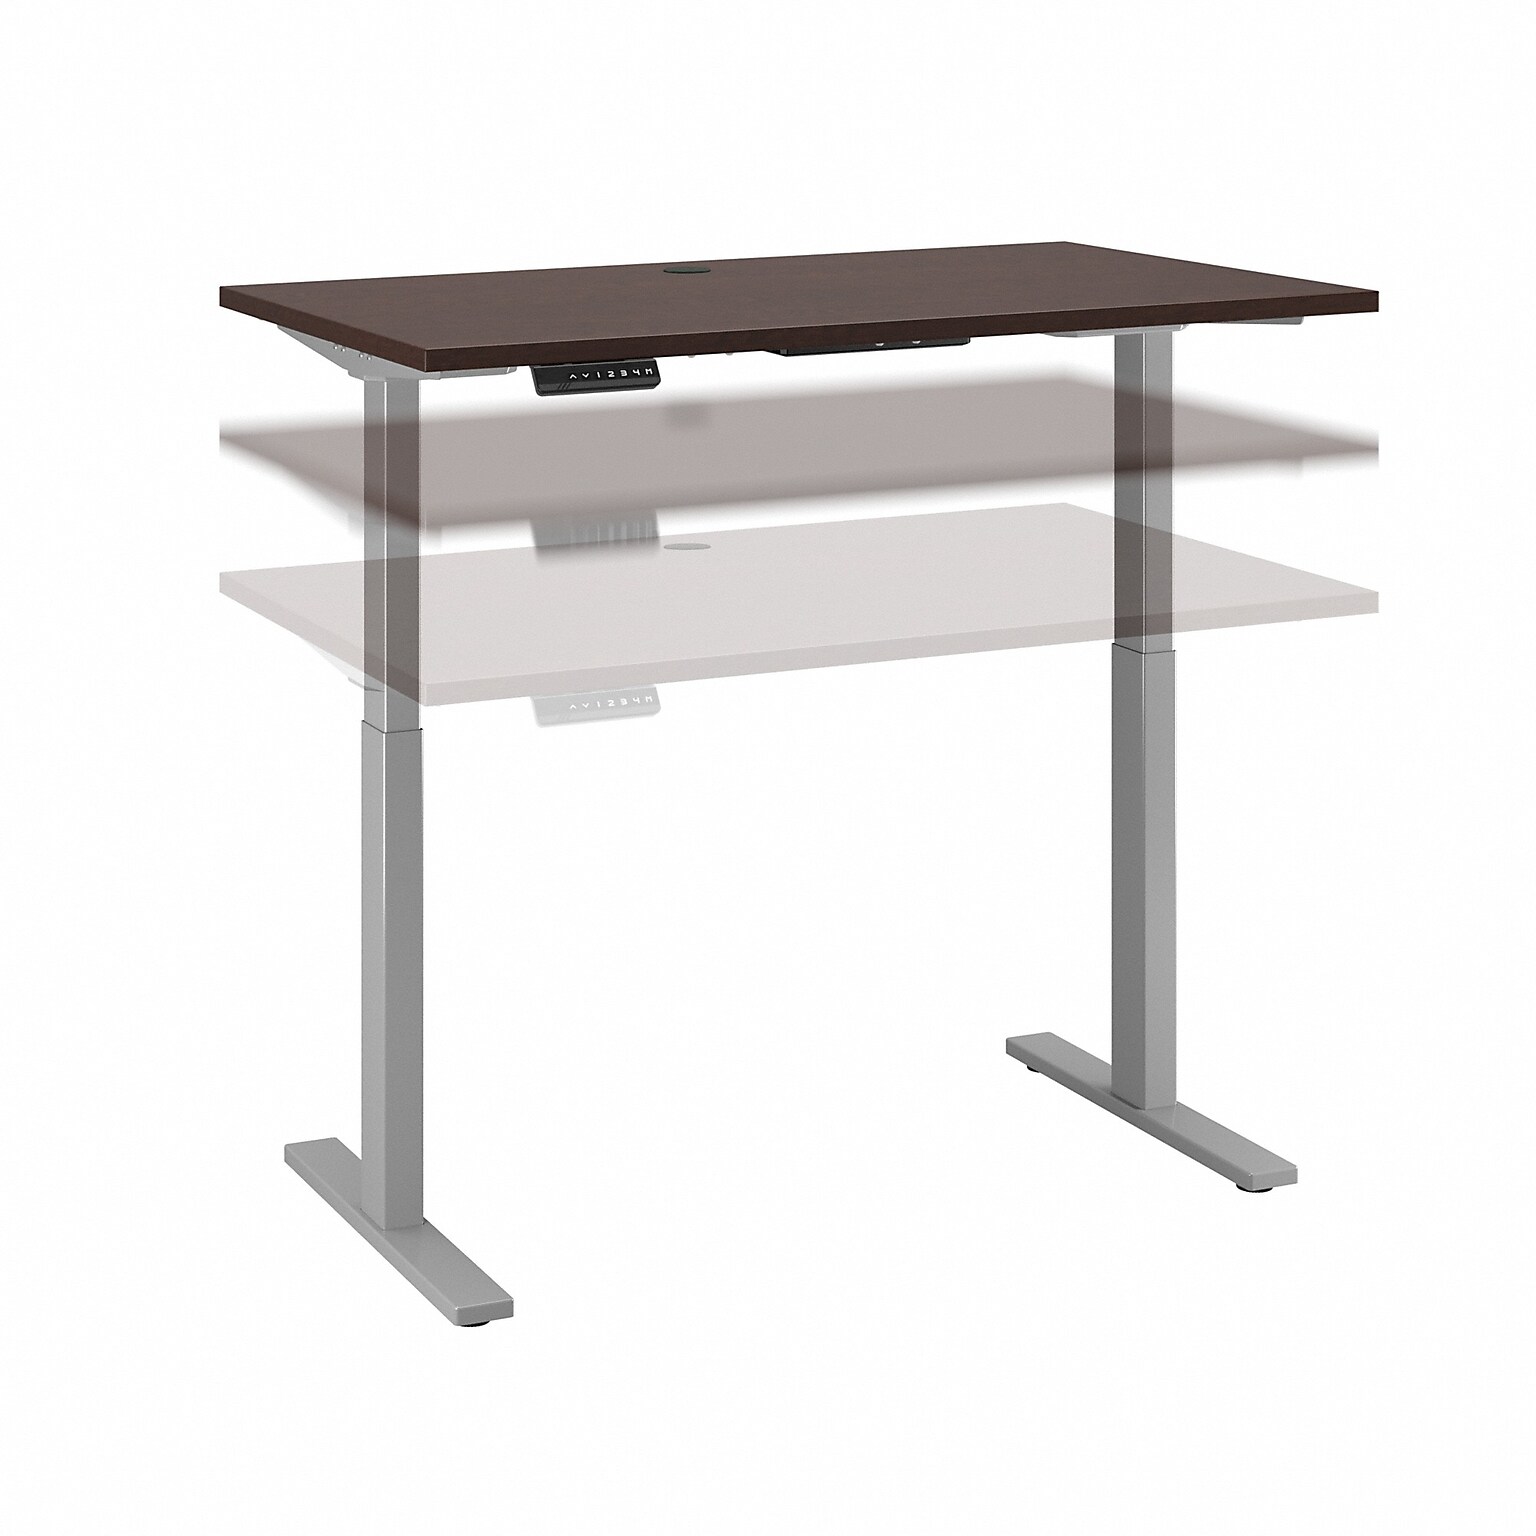 Bush Business Furniture Move 60 Series 48W Electric Height Adjustable Standing Desk, Mocha Cherry (M6S4824MRSK)